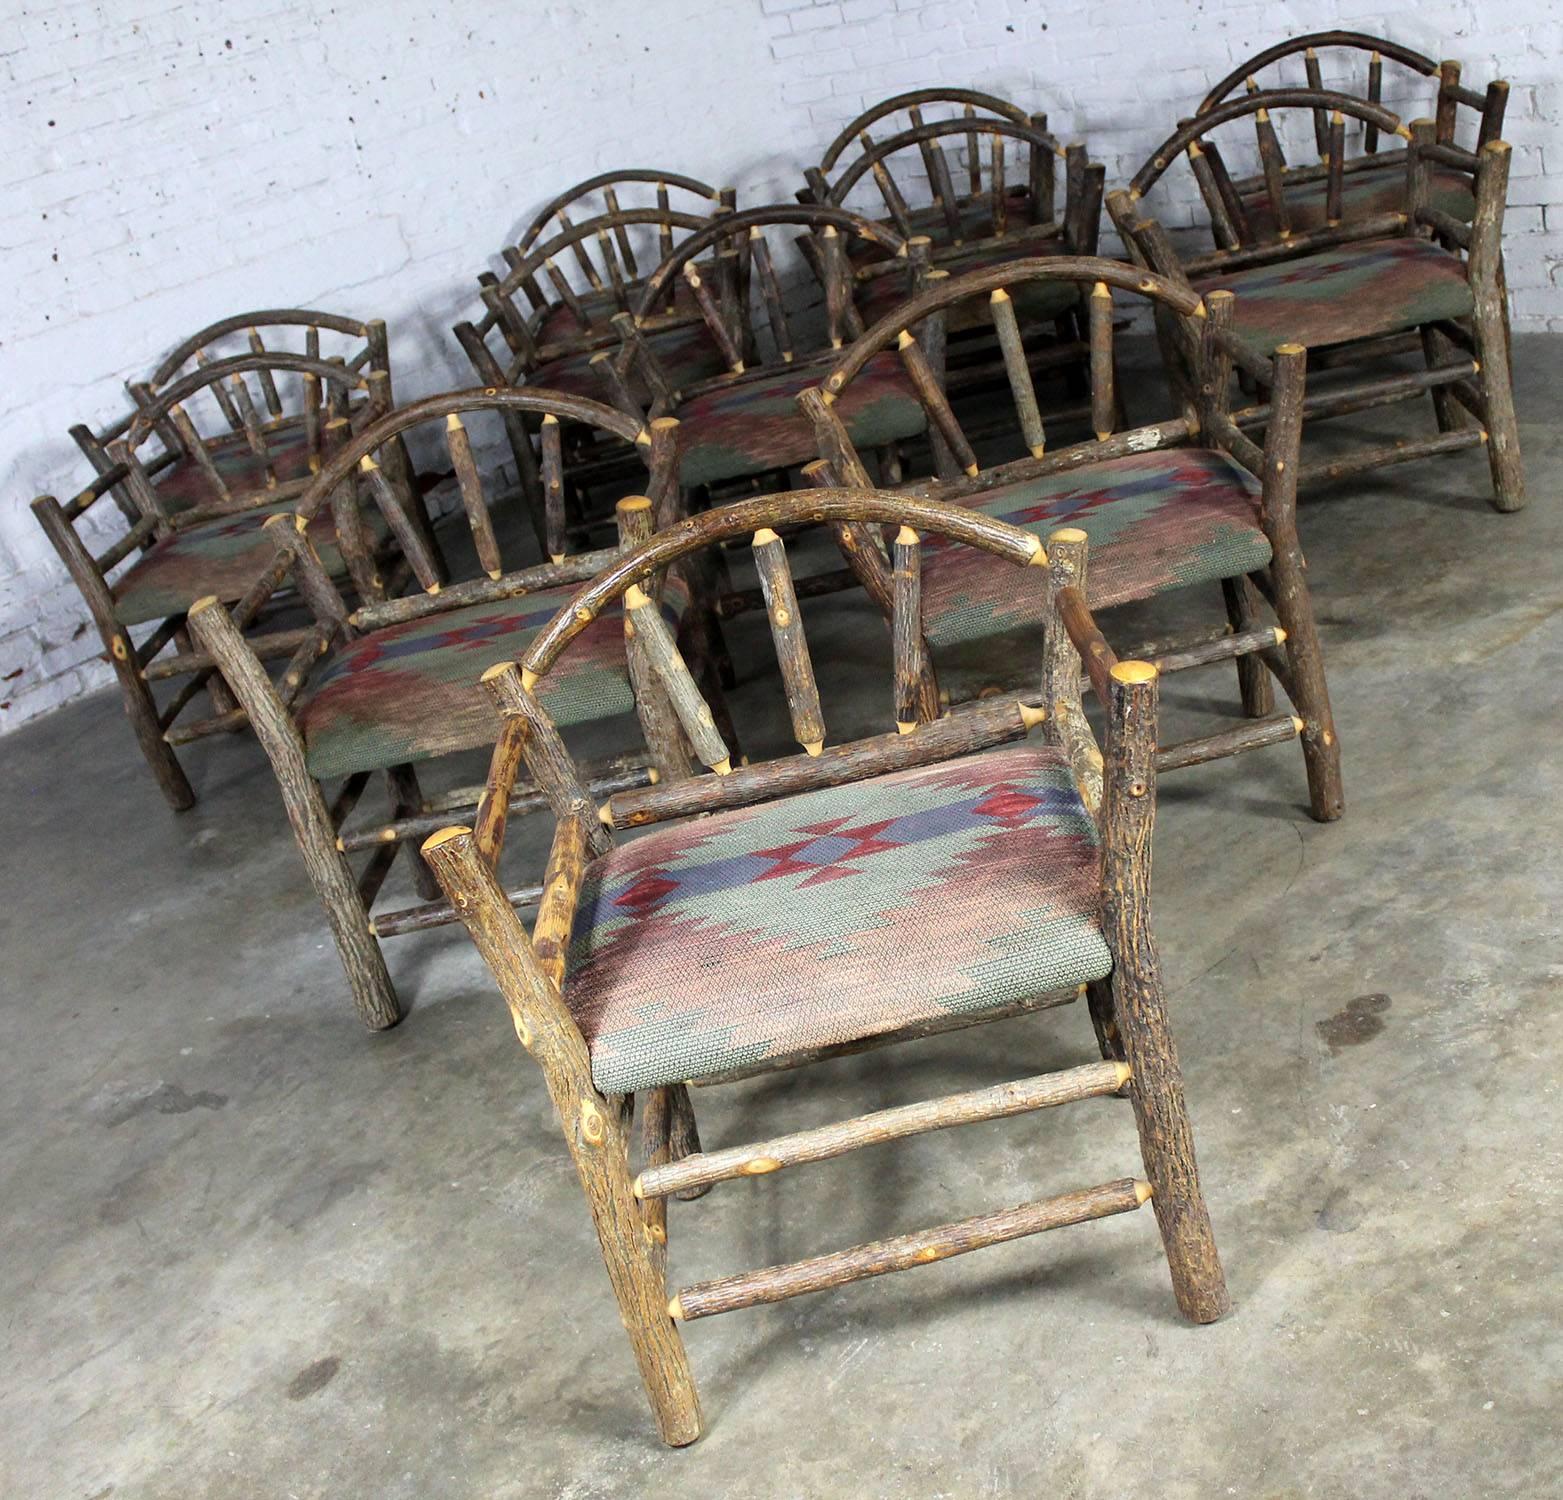 Awesome set of twelve rustic hickory armed dining chairs in the style of Old Hickory. These chairs are in exceptionally good condition. The seats are covered in a blue, green and wine colored western or cabin style upholstery. If the fabric suits